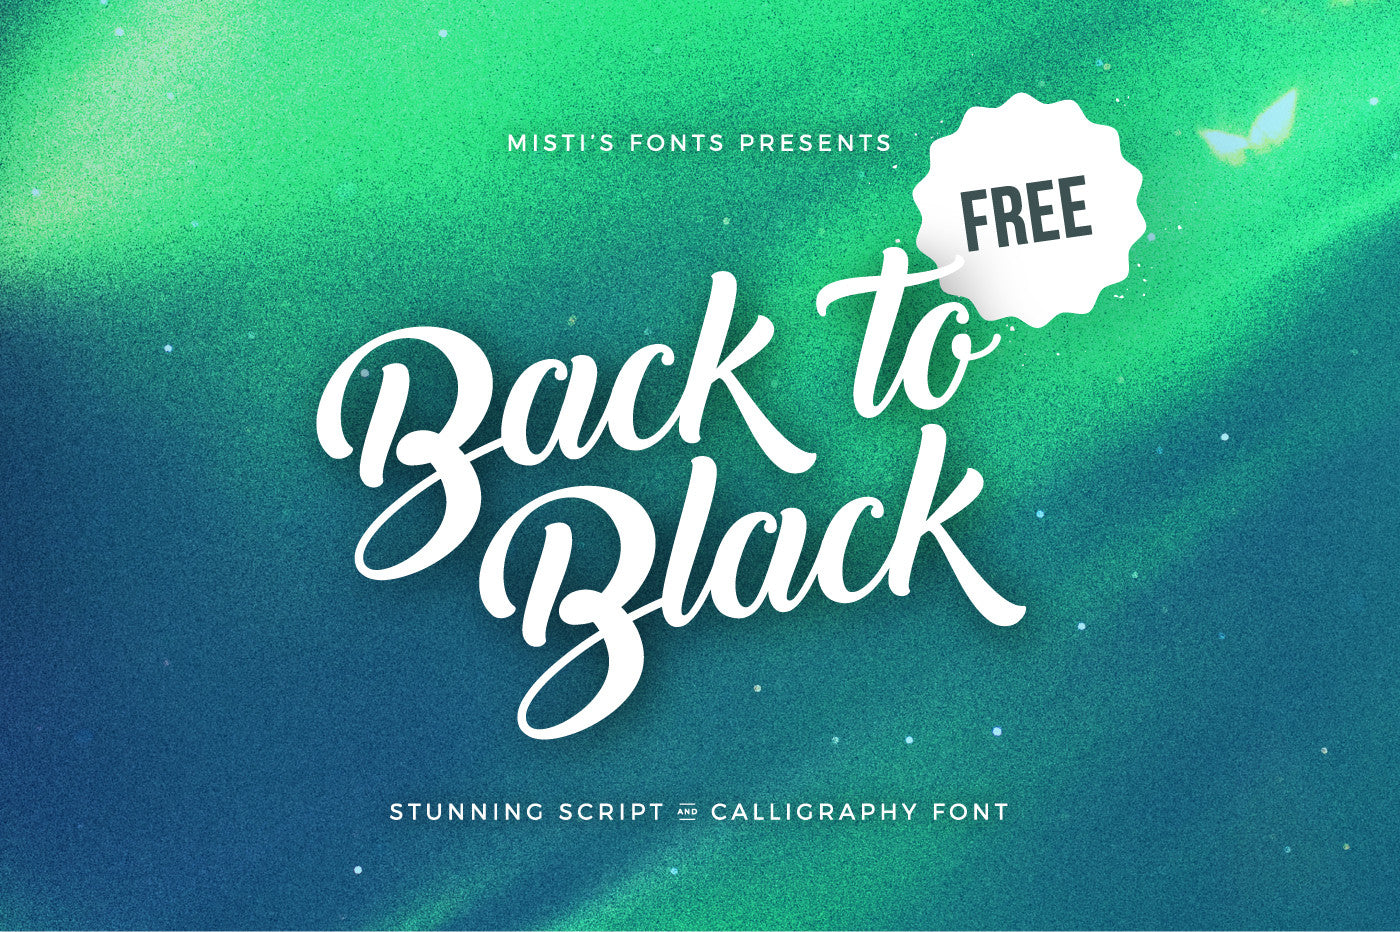 Back to Black - Free Script & Calligraphy Font